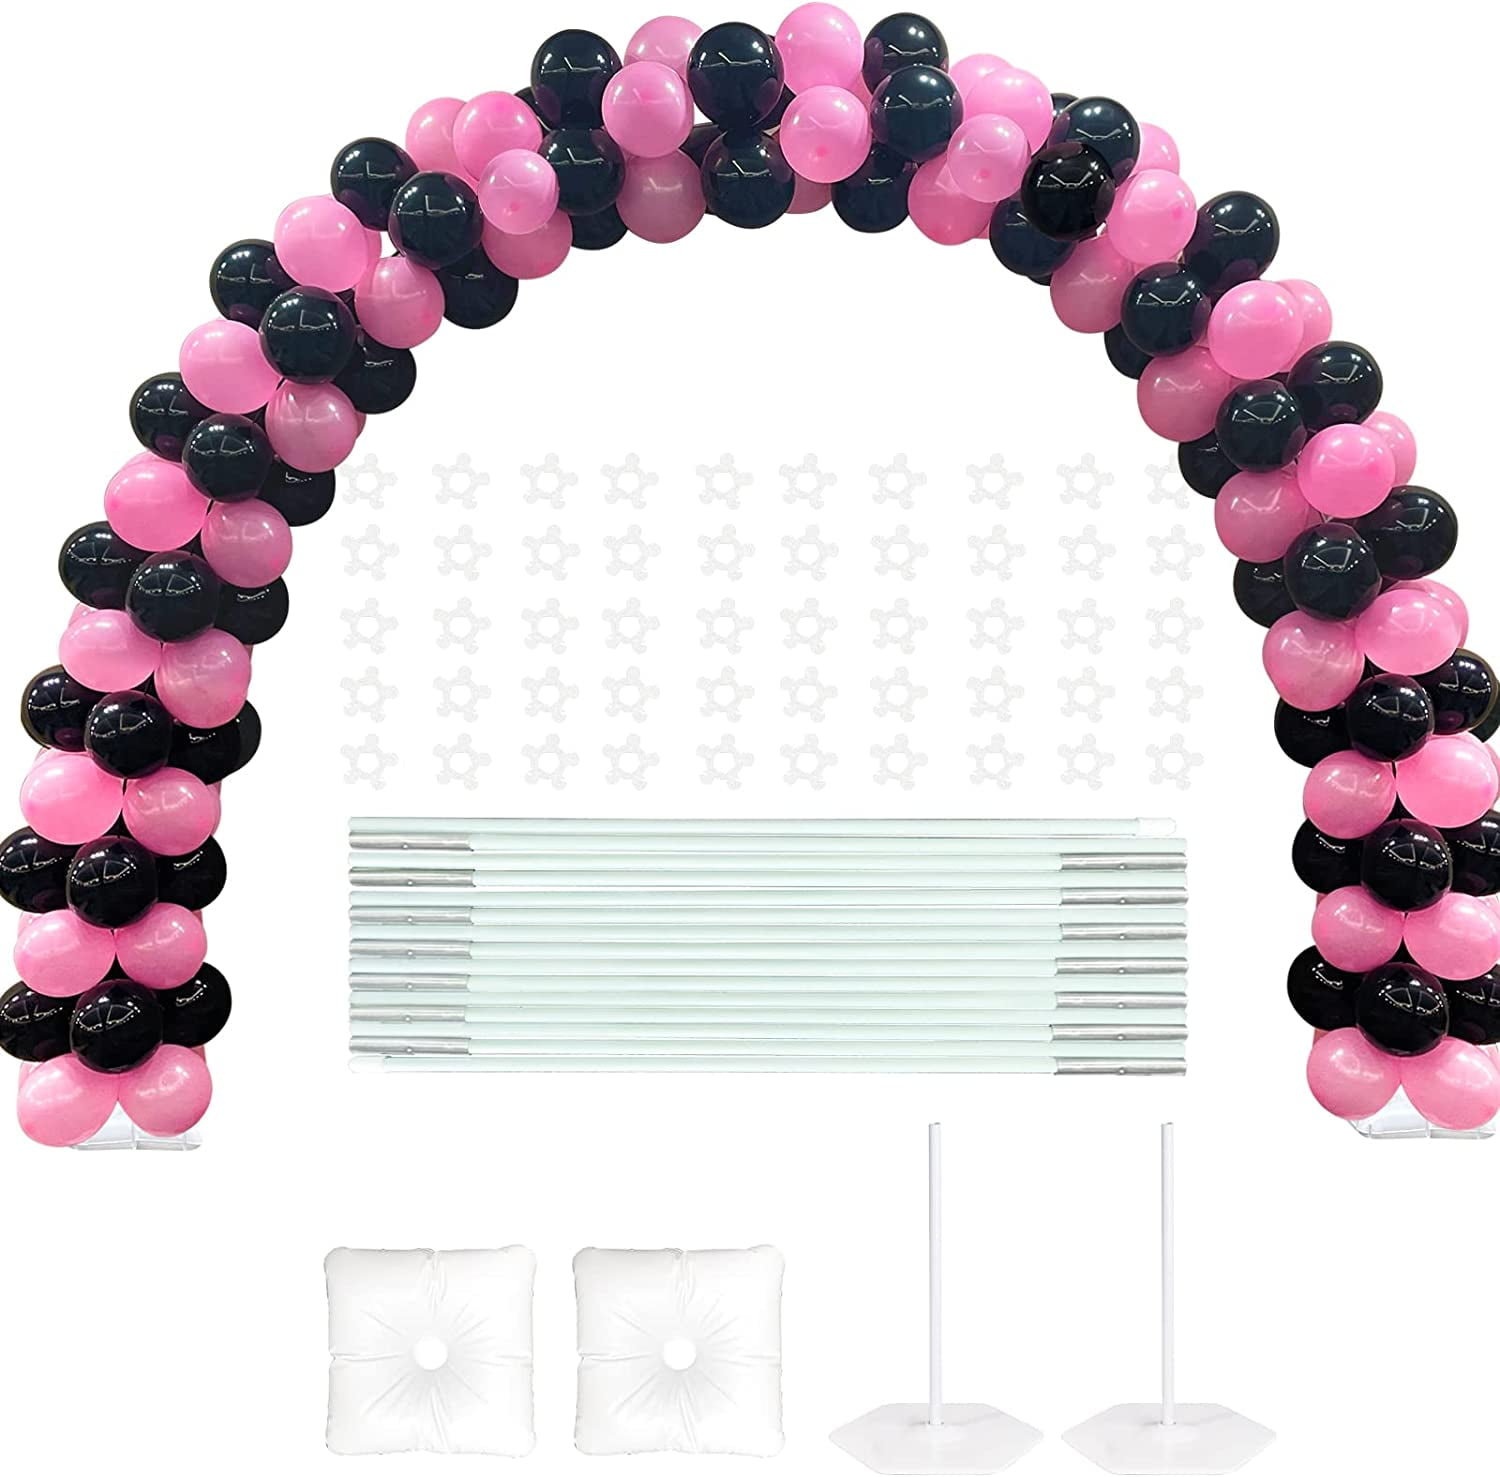 Discount Party Supplies - Beautiful new 4 Metre Balloon Arch Kits have just  arrived! Including 70 to 80 balloons depending on the kit, balloon tape and  glue dots these kits have all